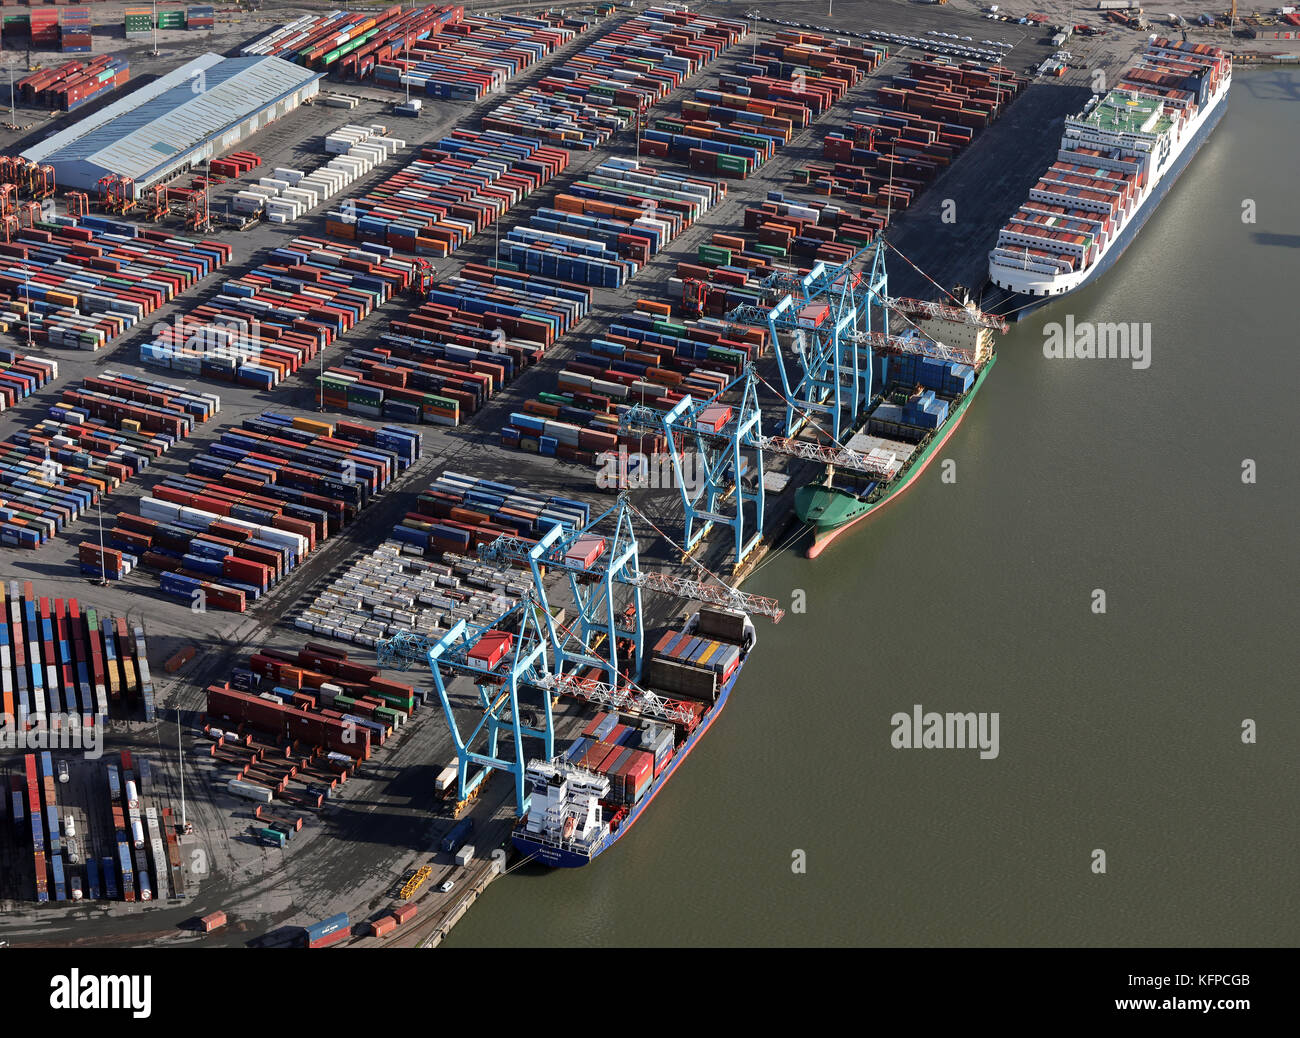 aerial view of 3 ships at Seaforth Docks, a container terminal, on the River Mersey, UK Stock Photo